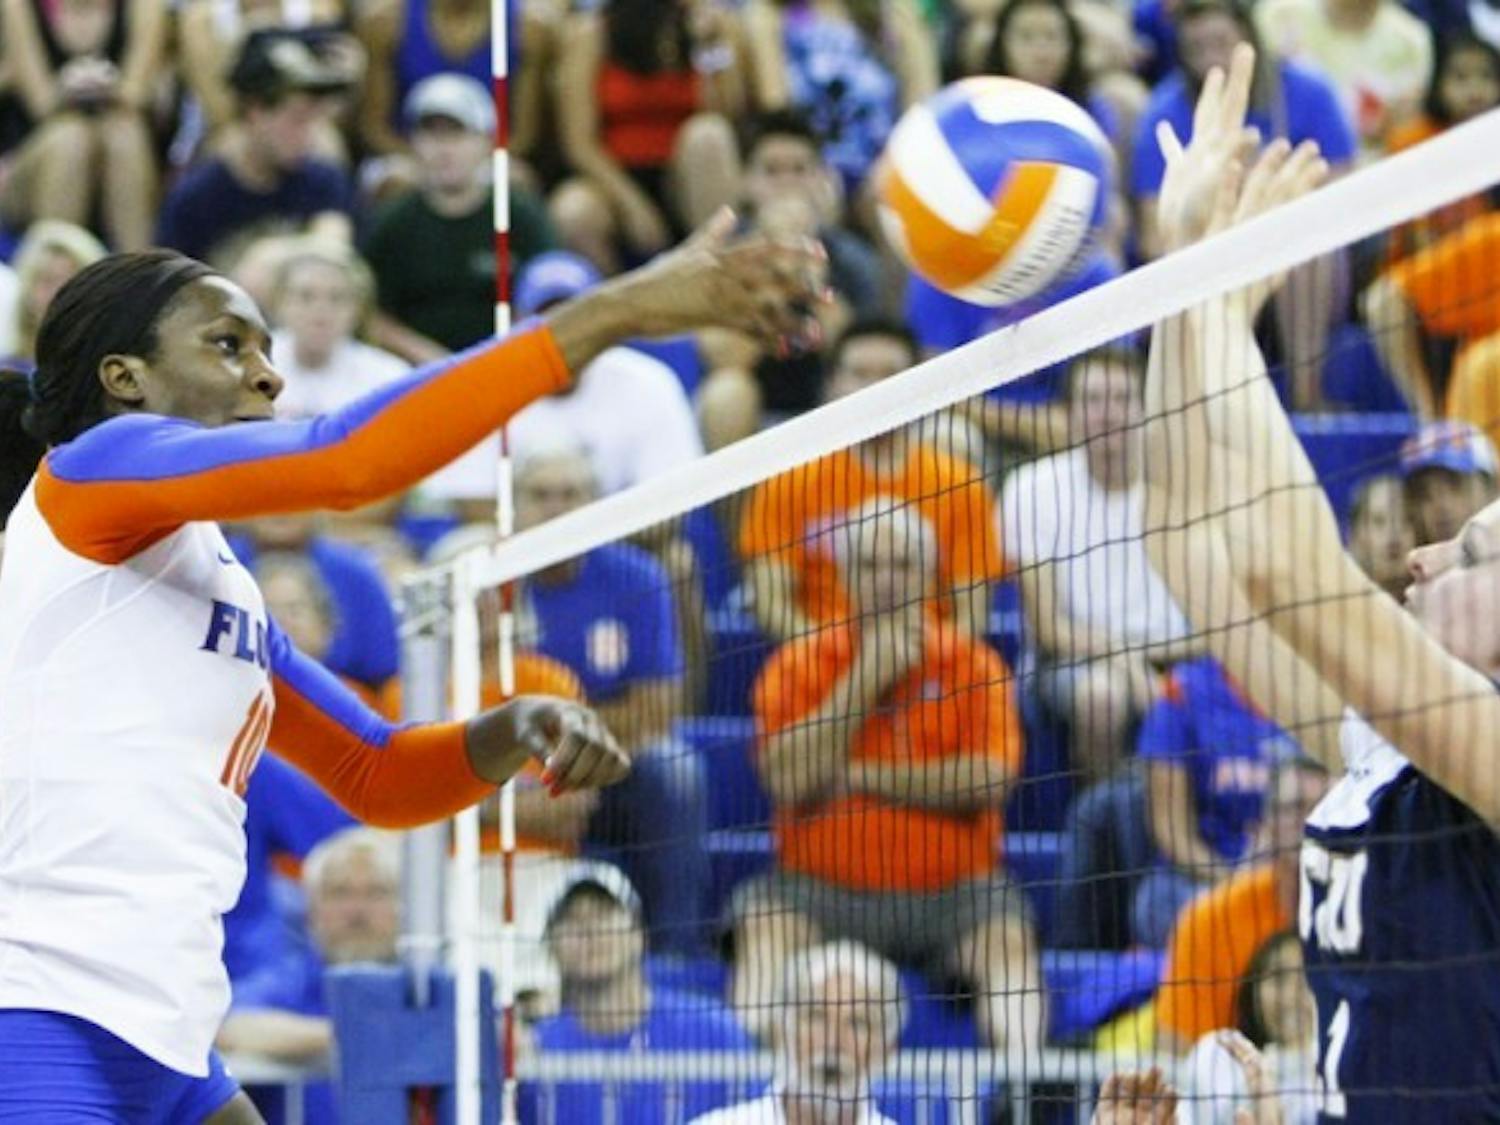 Chloe Mann help the No. 12 Florida Gators defeat the South Carolina Gamecocks on Friday night in Columbia, S.C. She set career highs with 20 kills and 22 points.